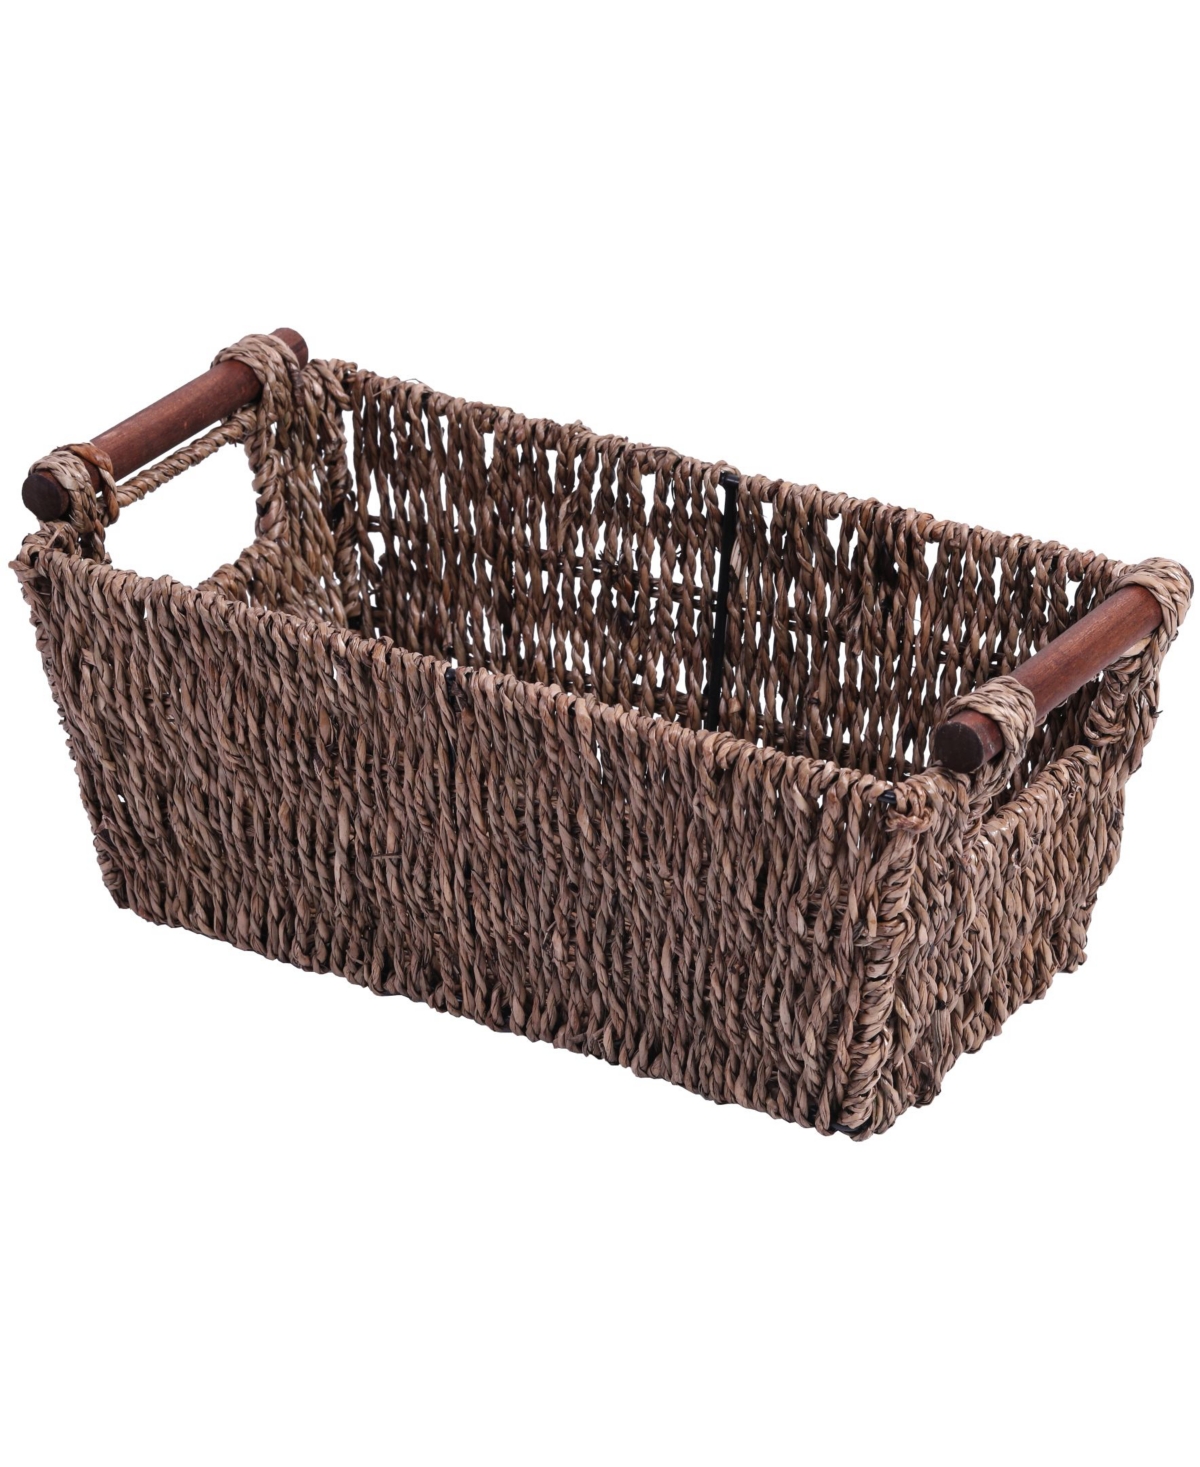 Seagrass Counter-Top Basket - Brown